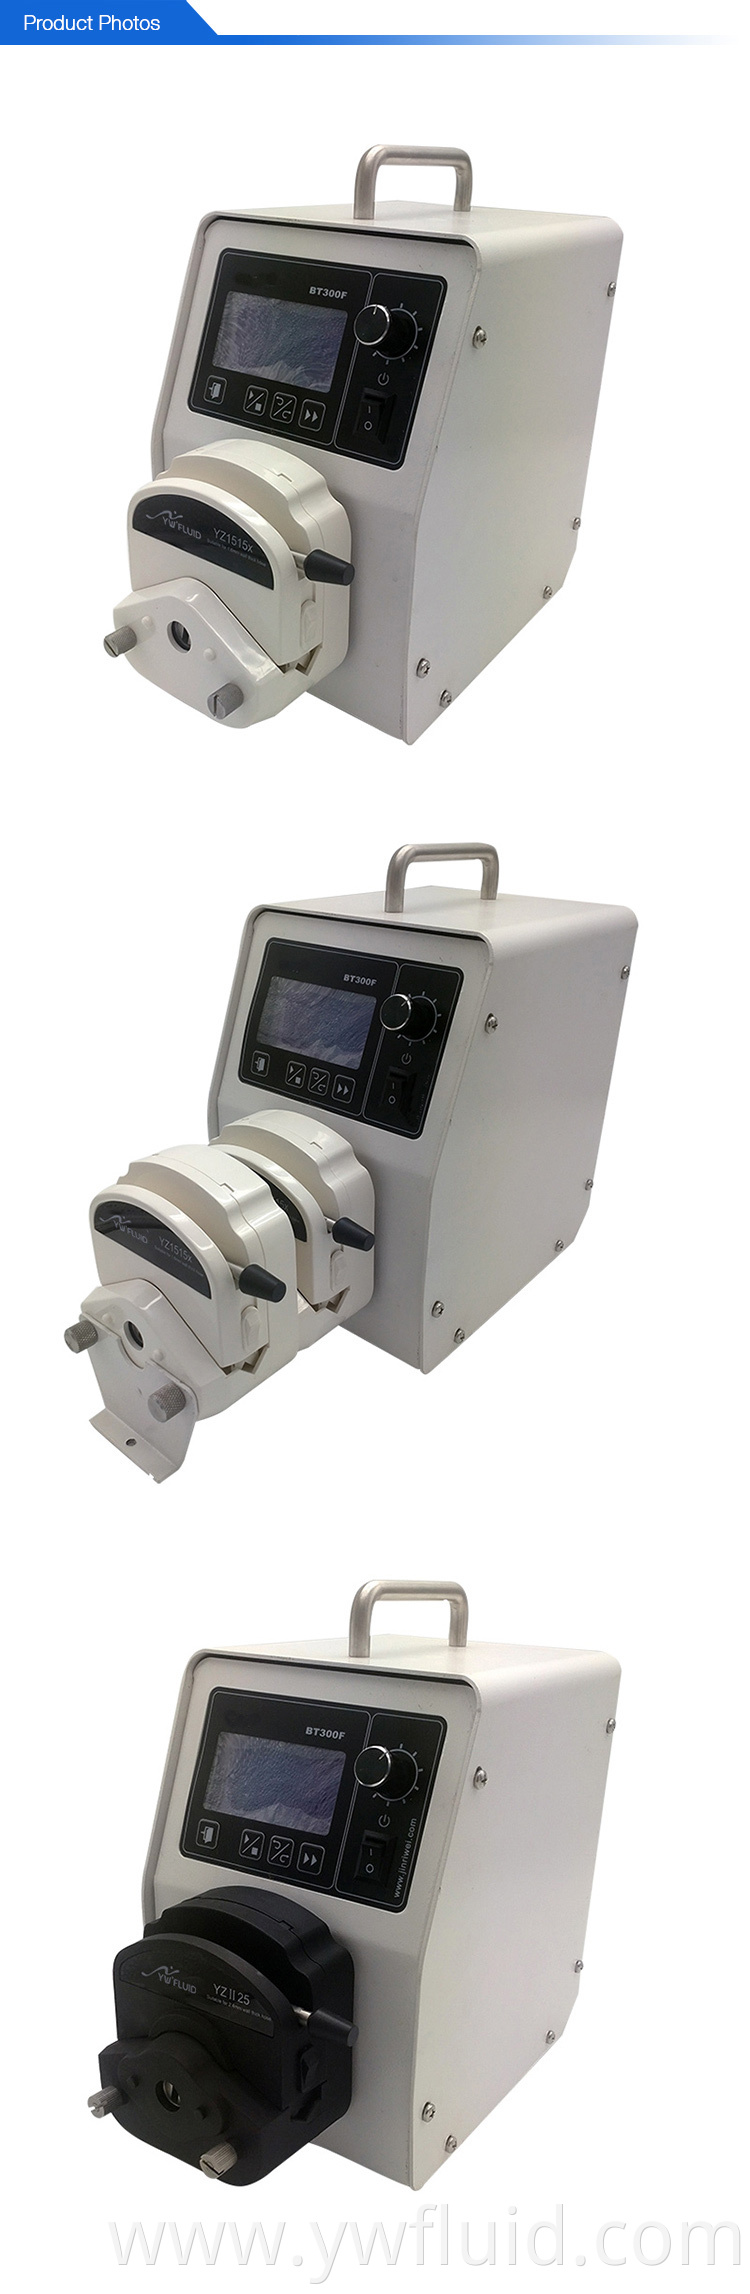 YWfluid High Performance Peristaltic Pump with AC motor Speed Control Pump used for liquid transfer filling suction